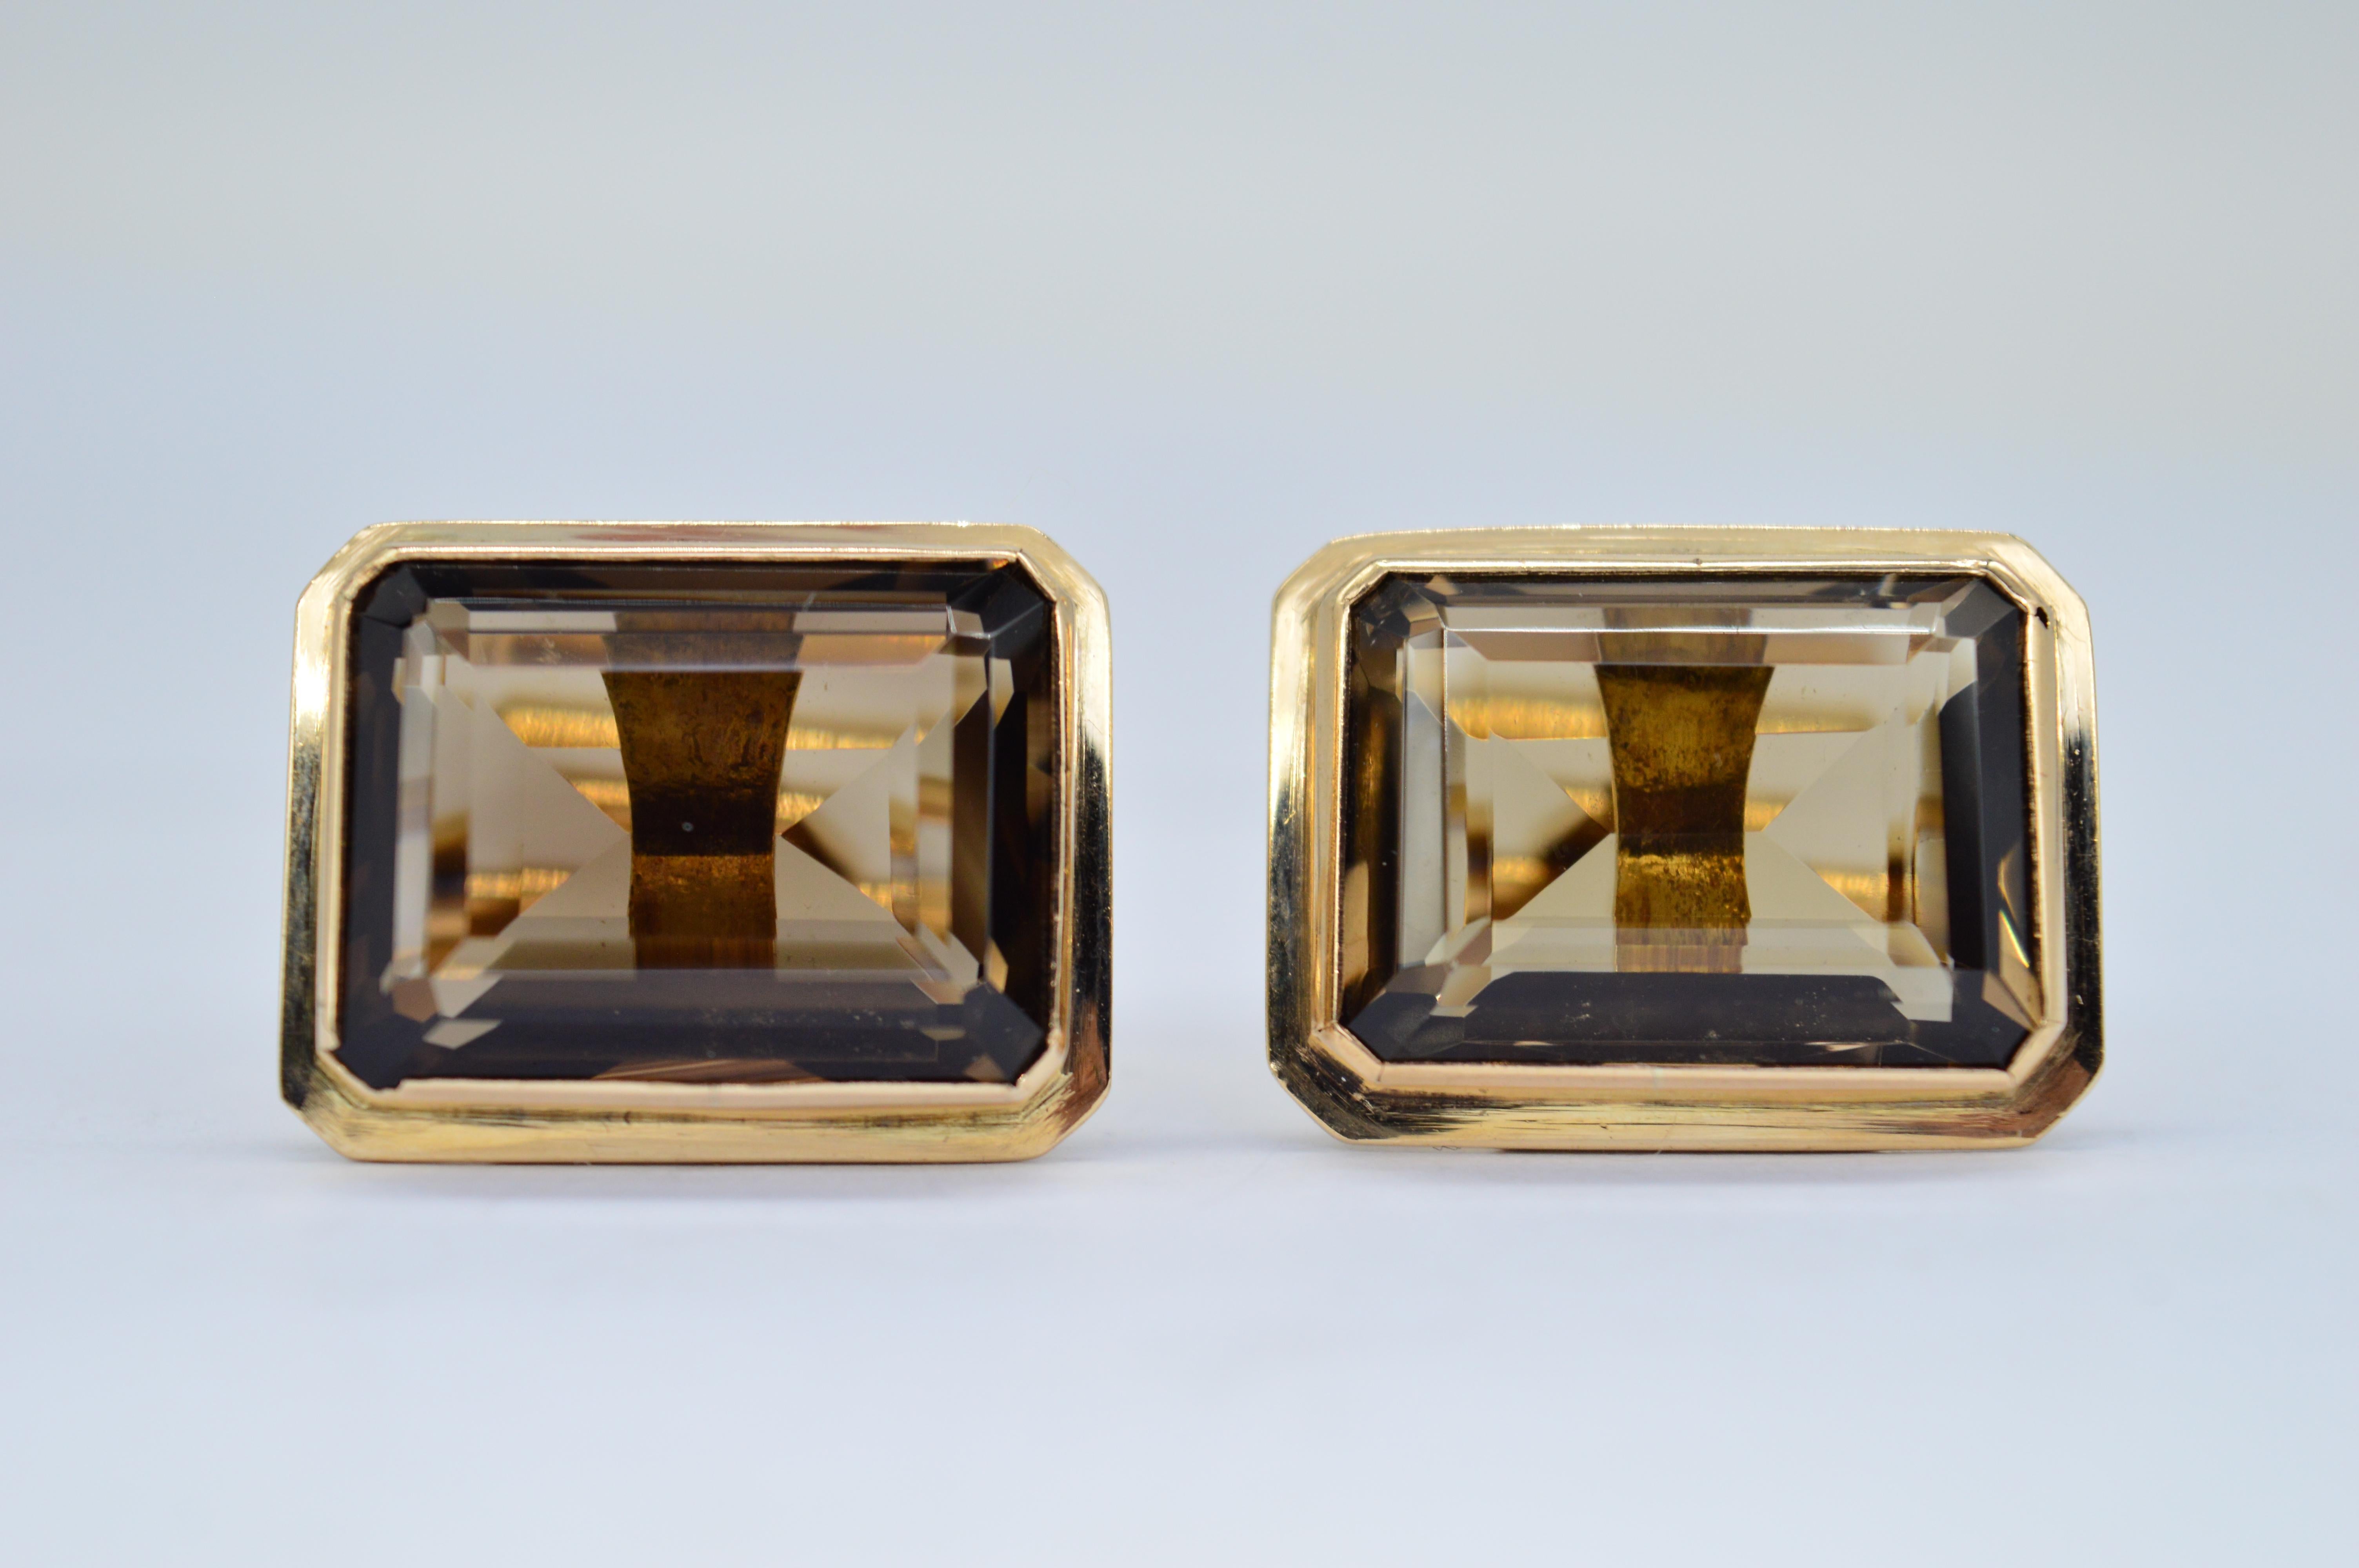 A set of vintage 14ct gold cufflinks made with smoky quartz

A statement set due to the oversized smoky quarts stones of flawless quality

19.74g

We have sold to the set of Hit shows like Peaky Blinders and Outlander as well as to Buckingham Palace